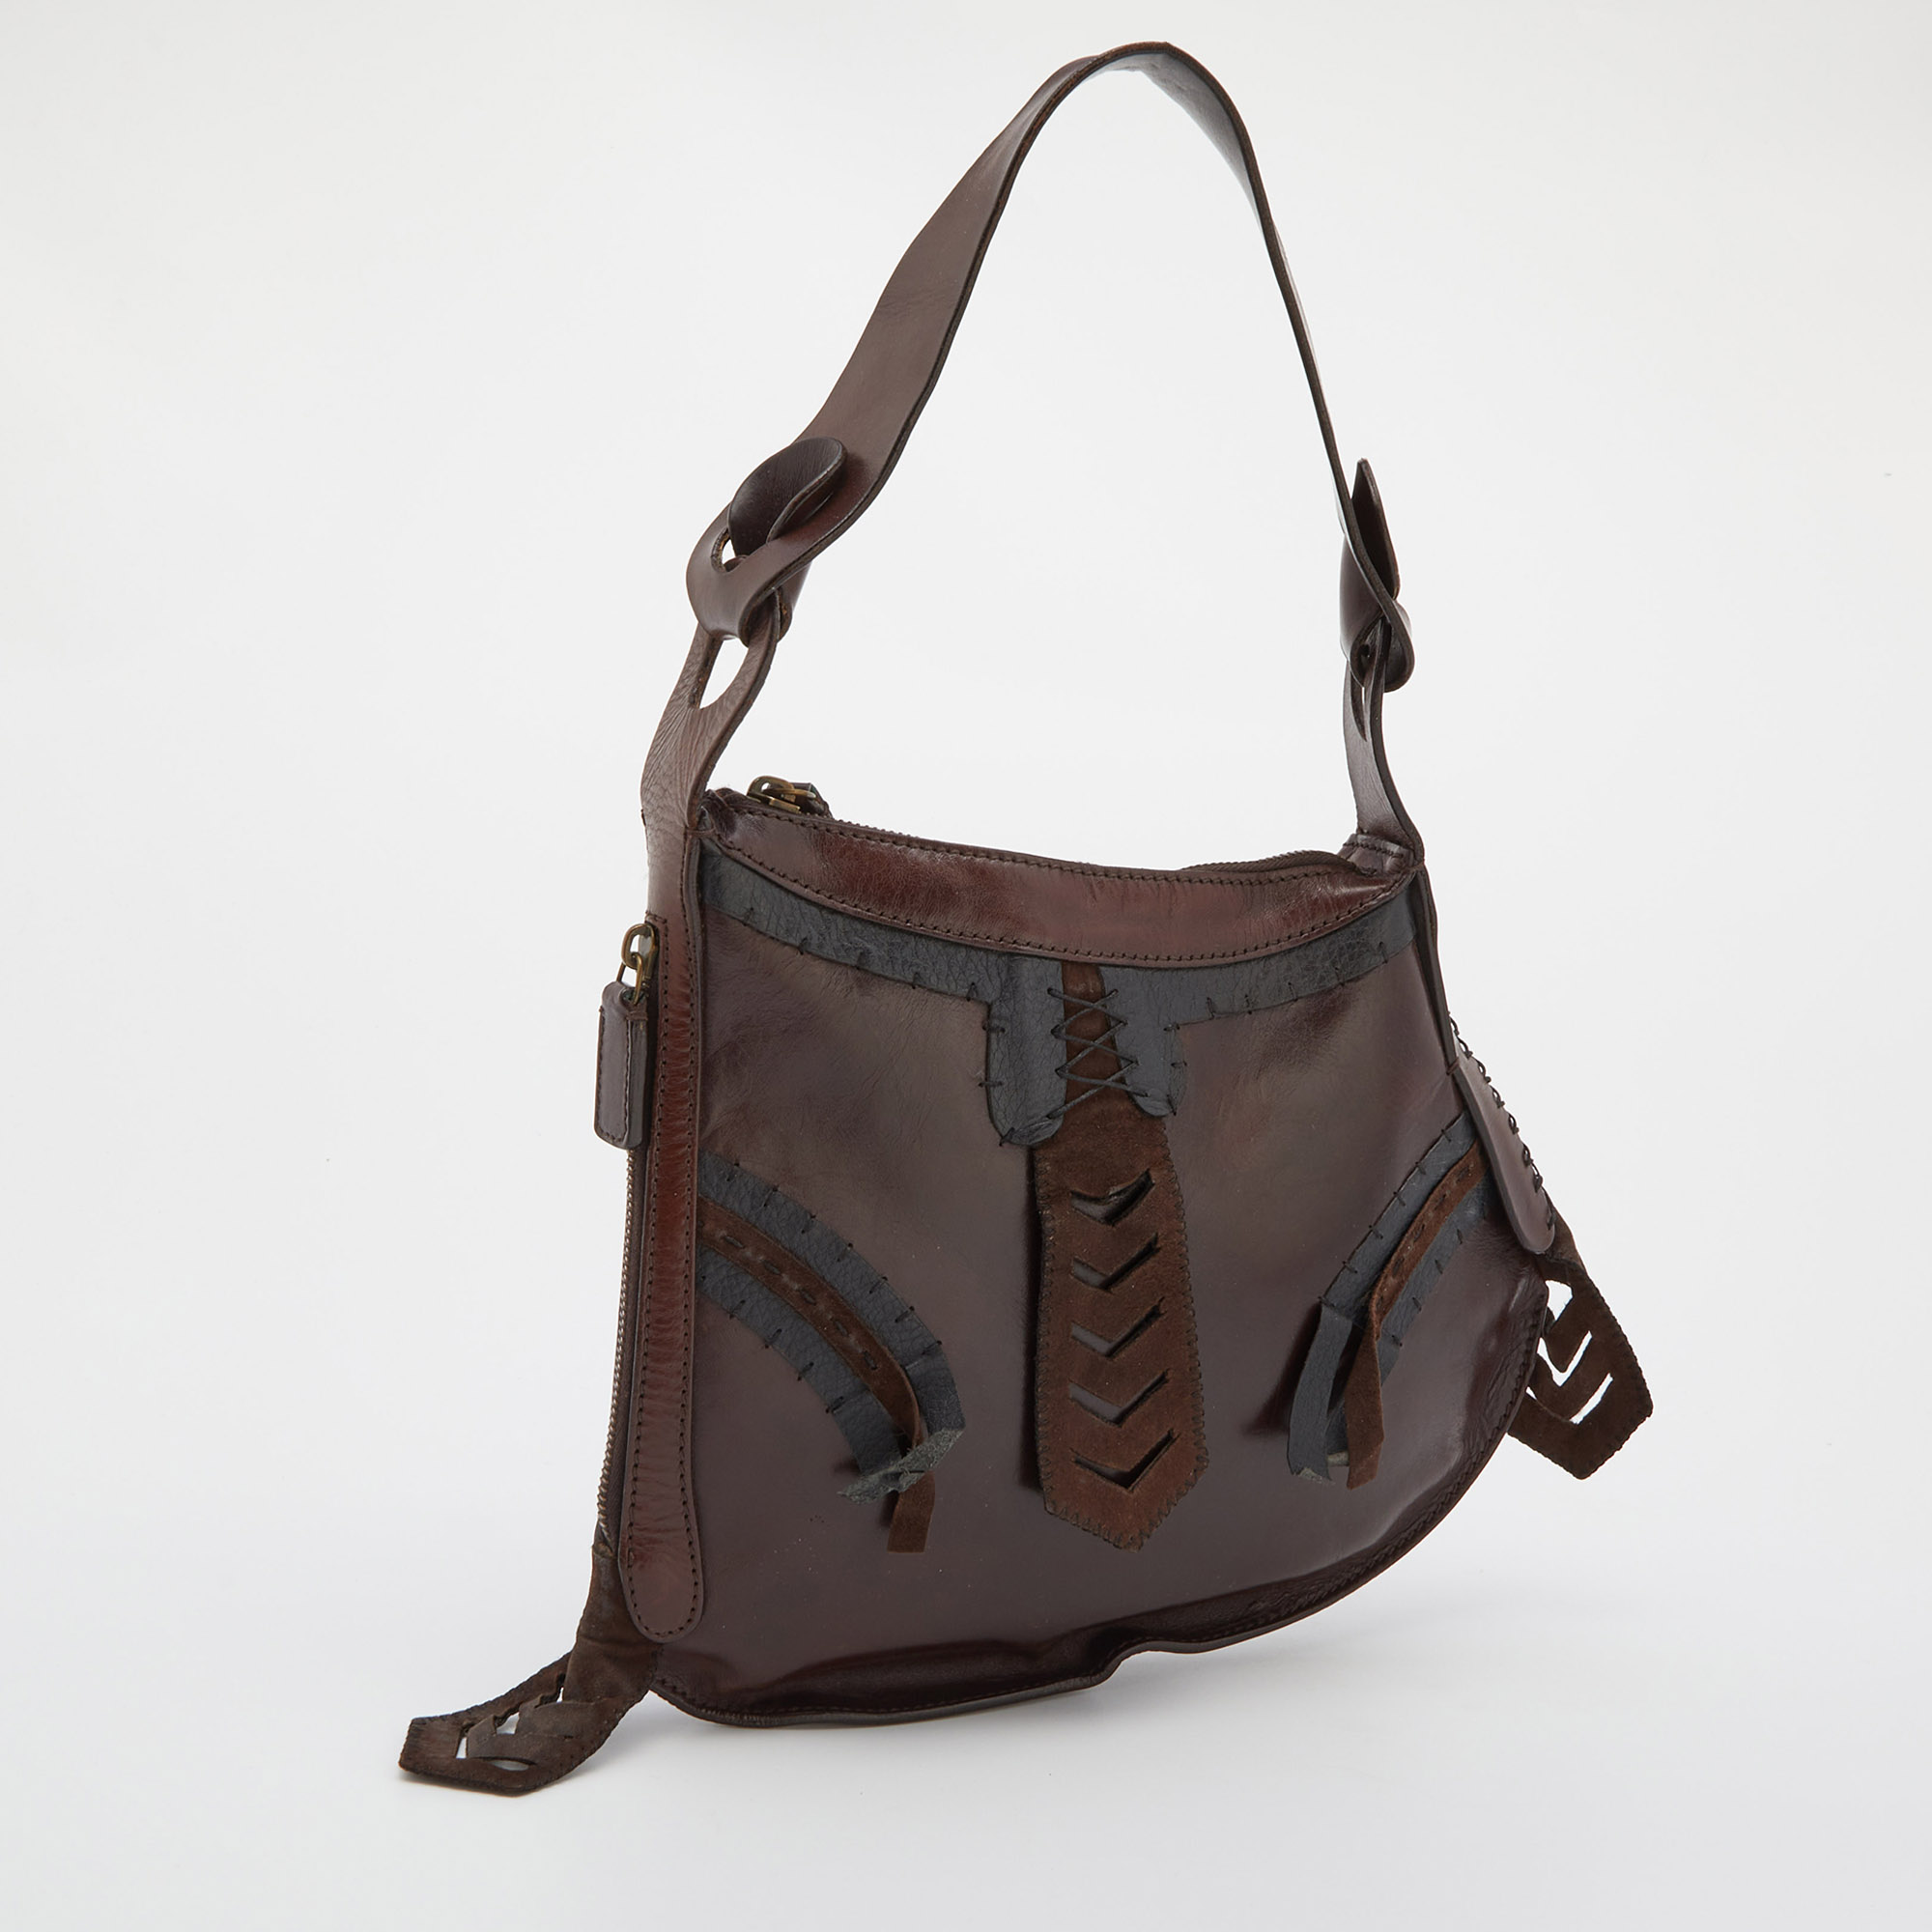 Fendi Brown Leather Oyster Hobo